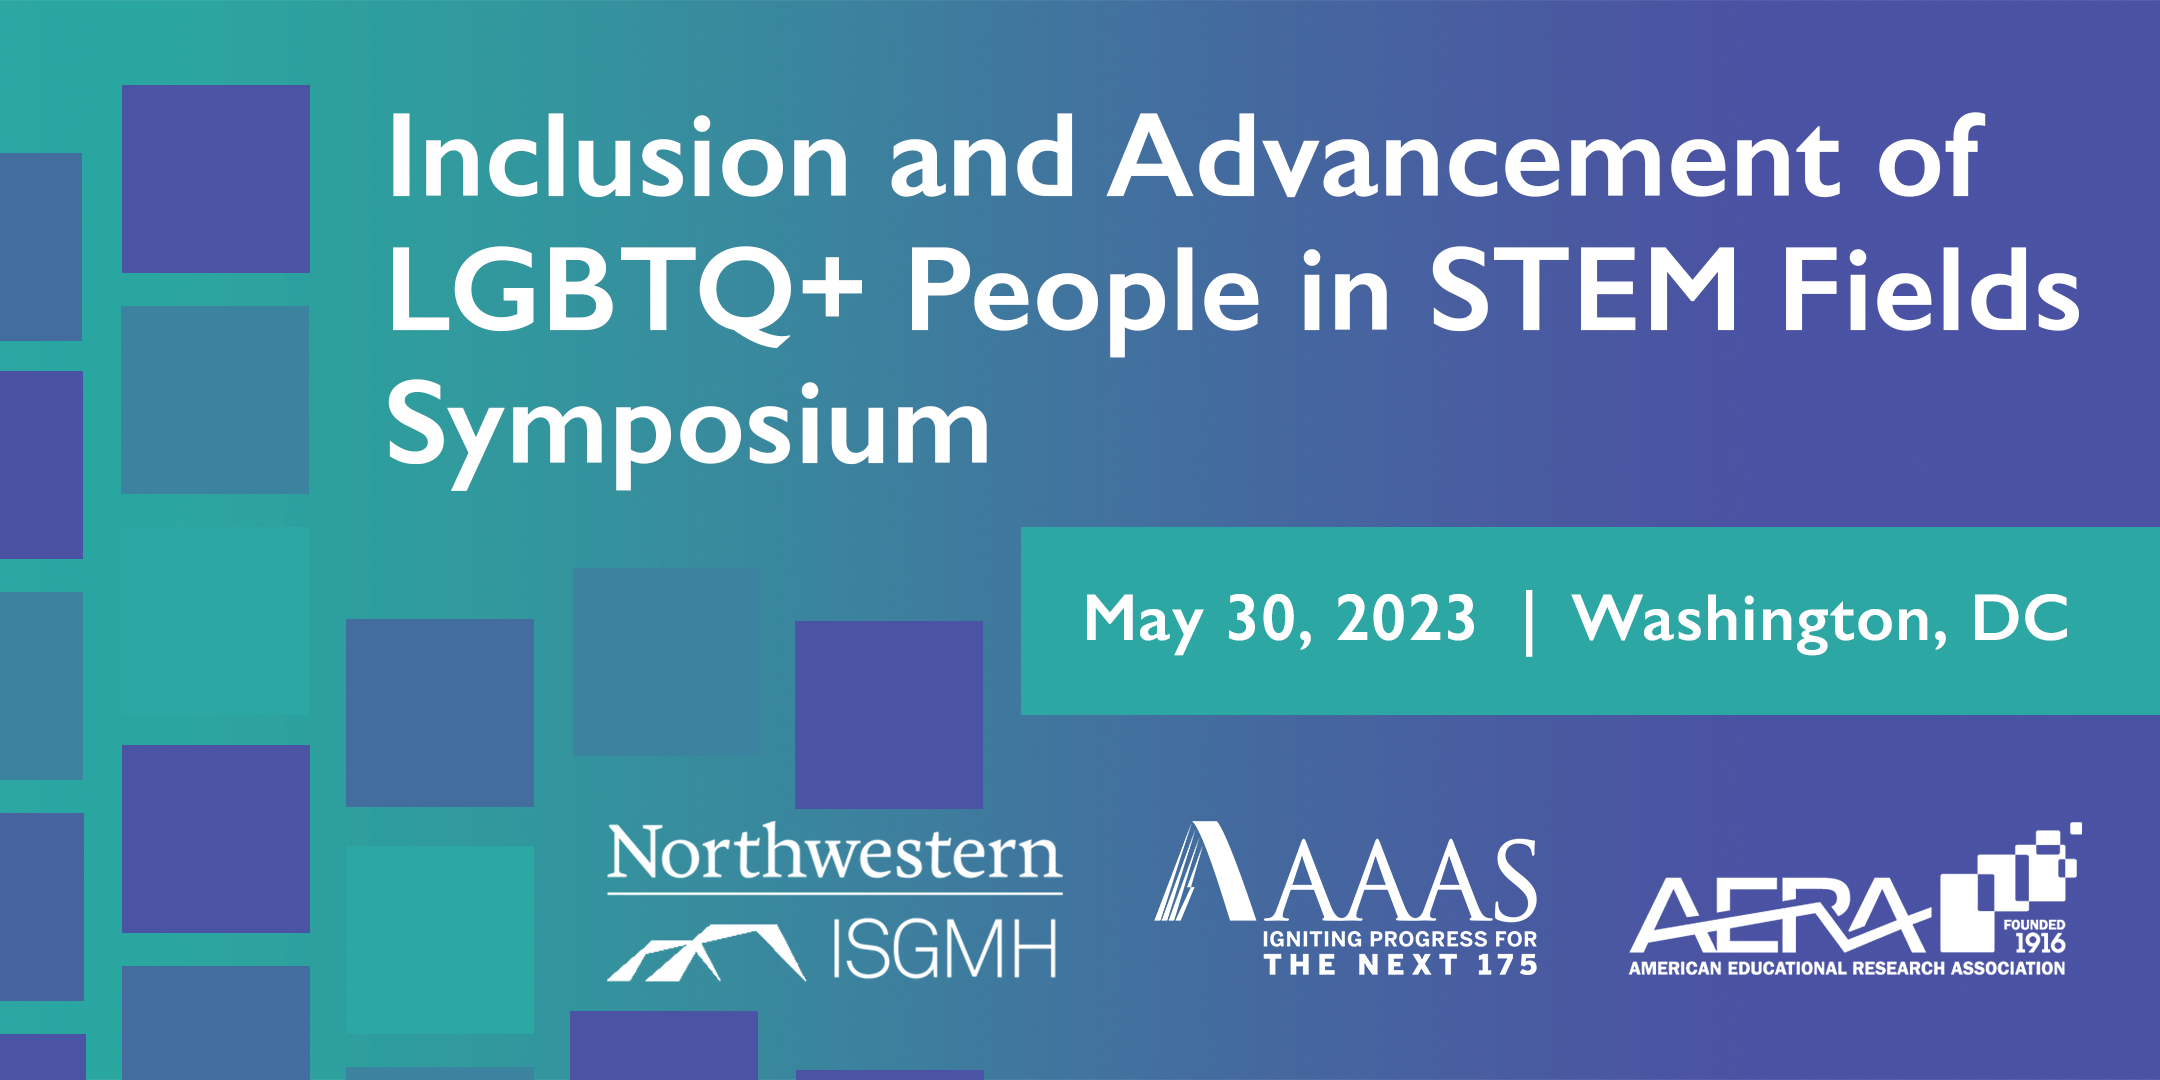 Inclusion and Advancement of LGBTQ People in STEM Fields Symposium; May 30, 2023, Washington, DC